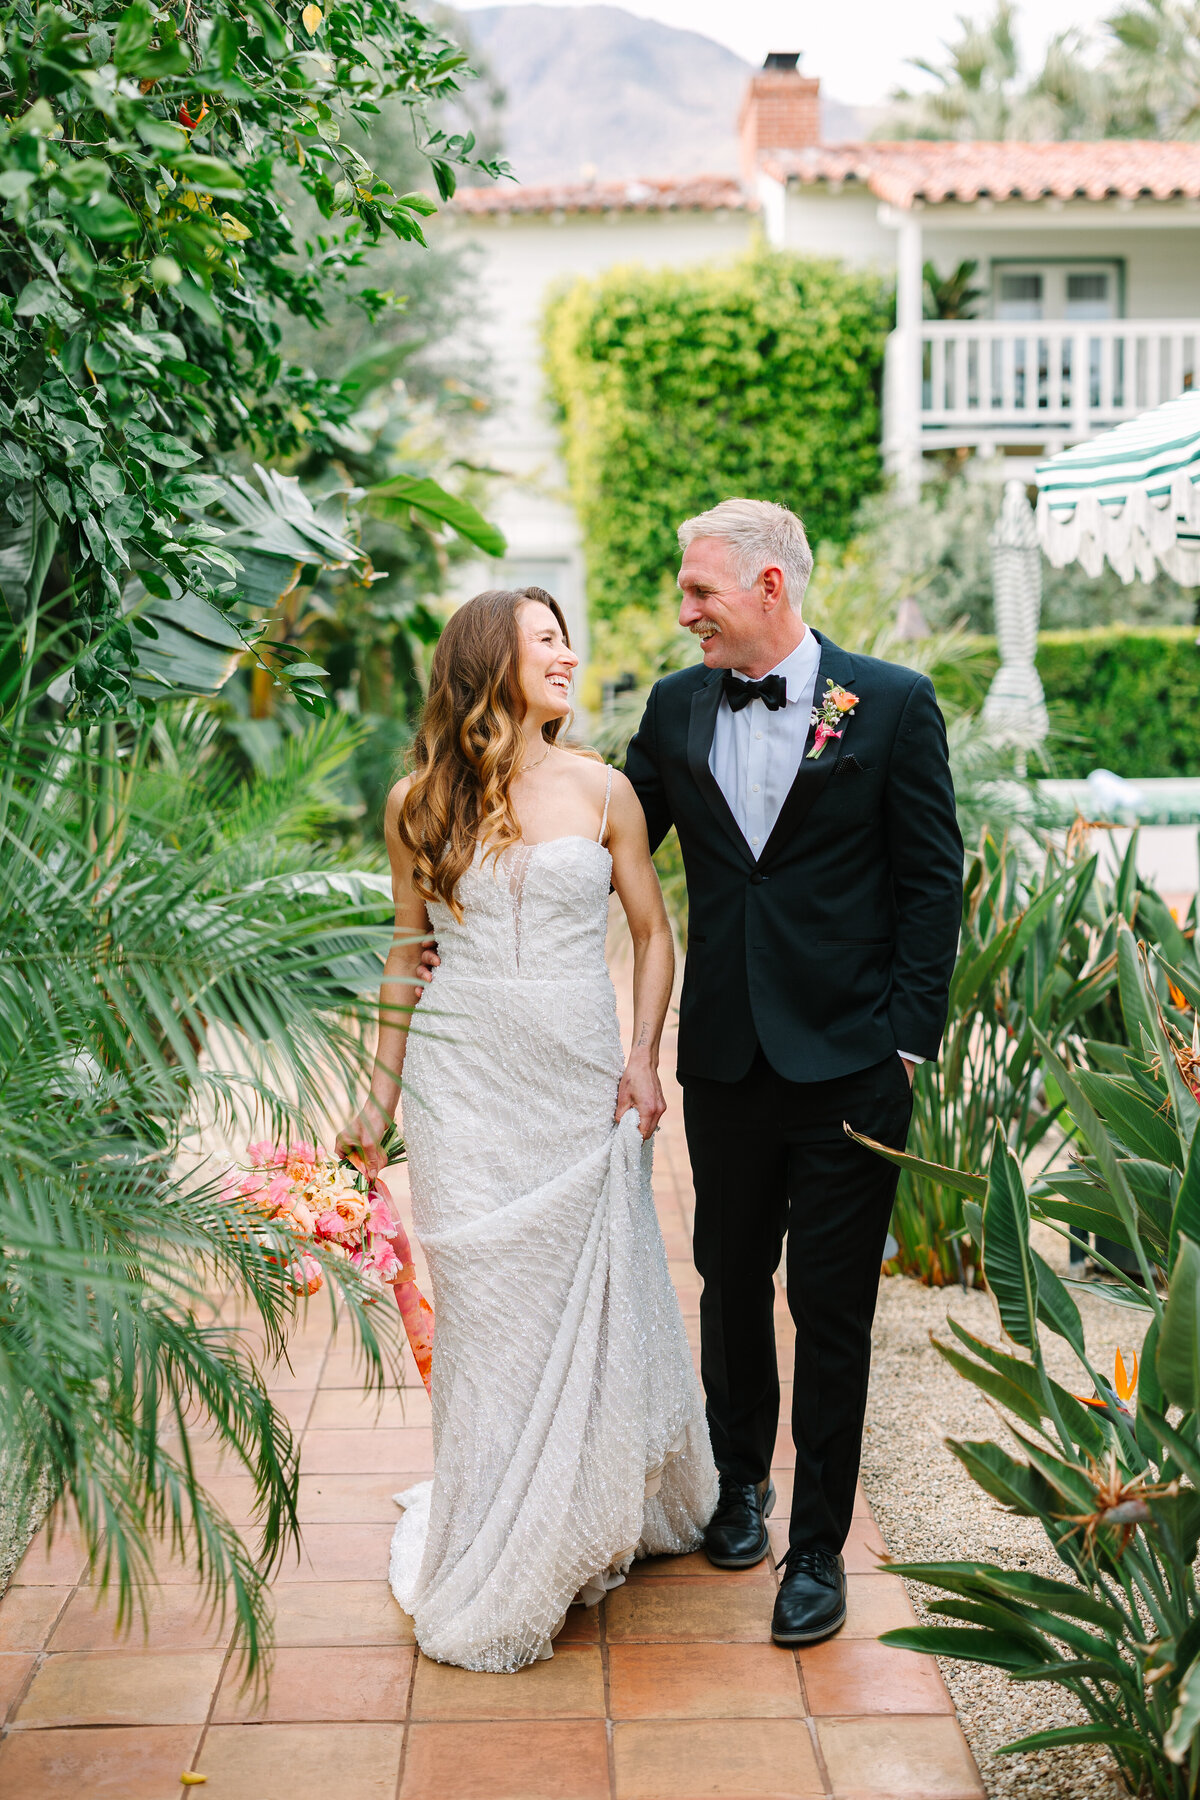 bride and groom standing side by side smiling at each other with green trees and landscaping surrounding them at napa wedding venue.